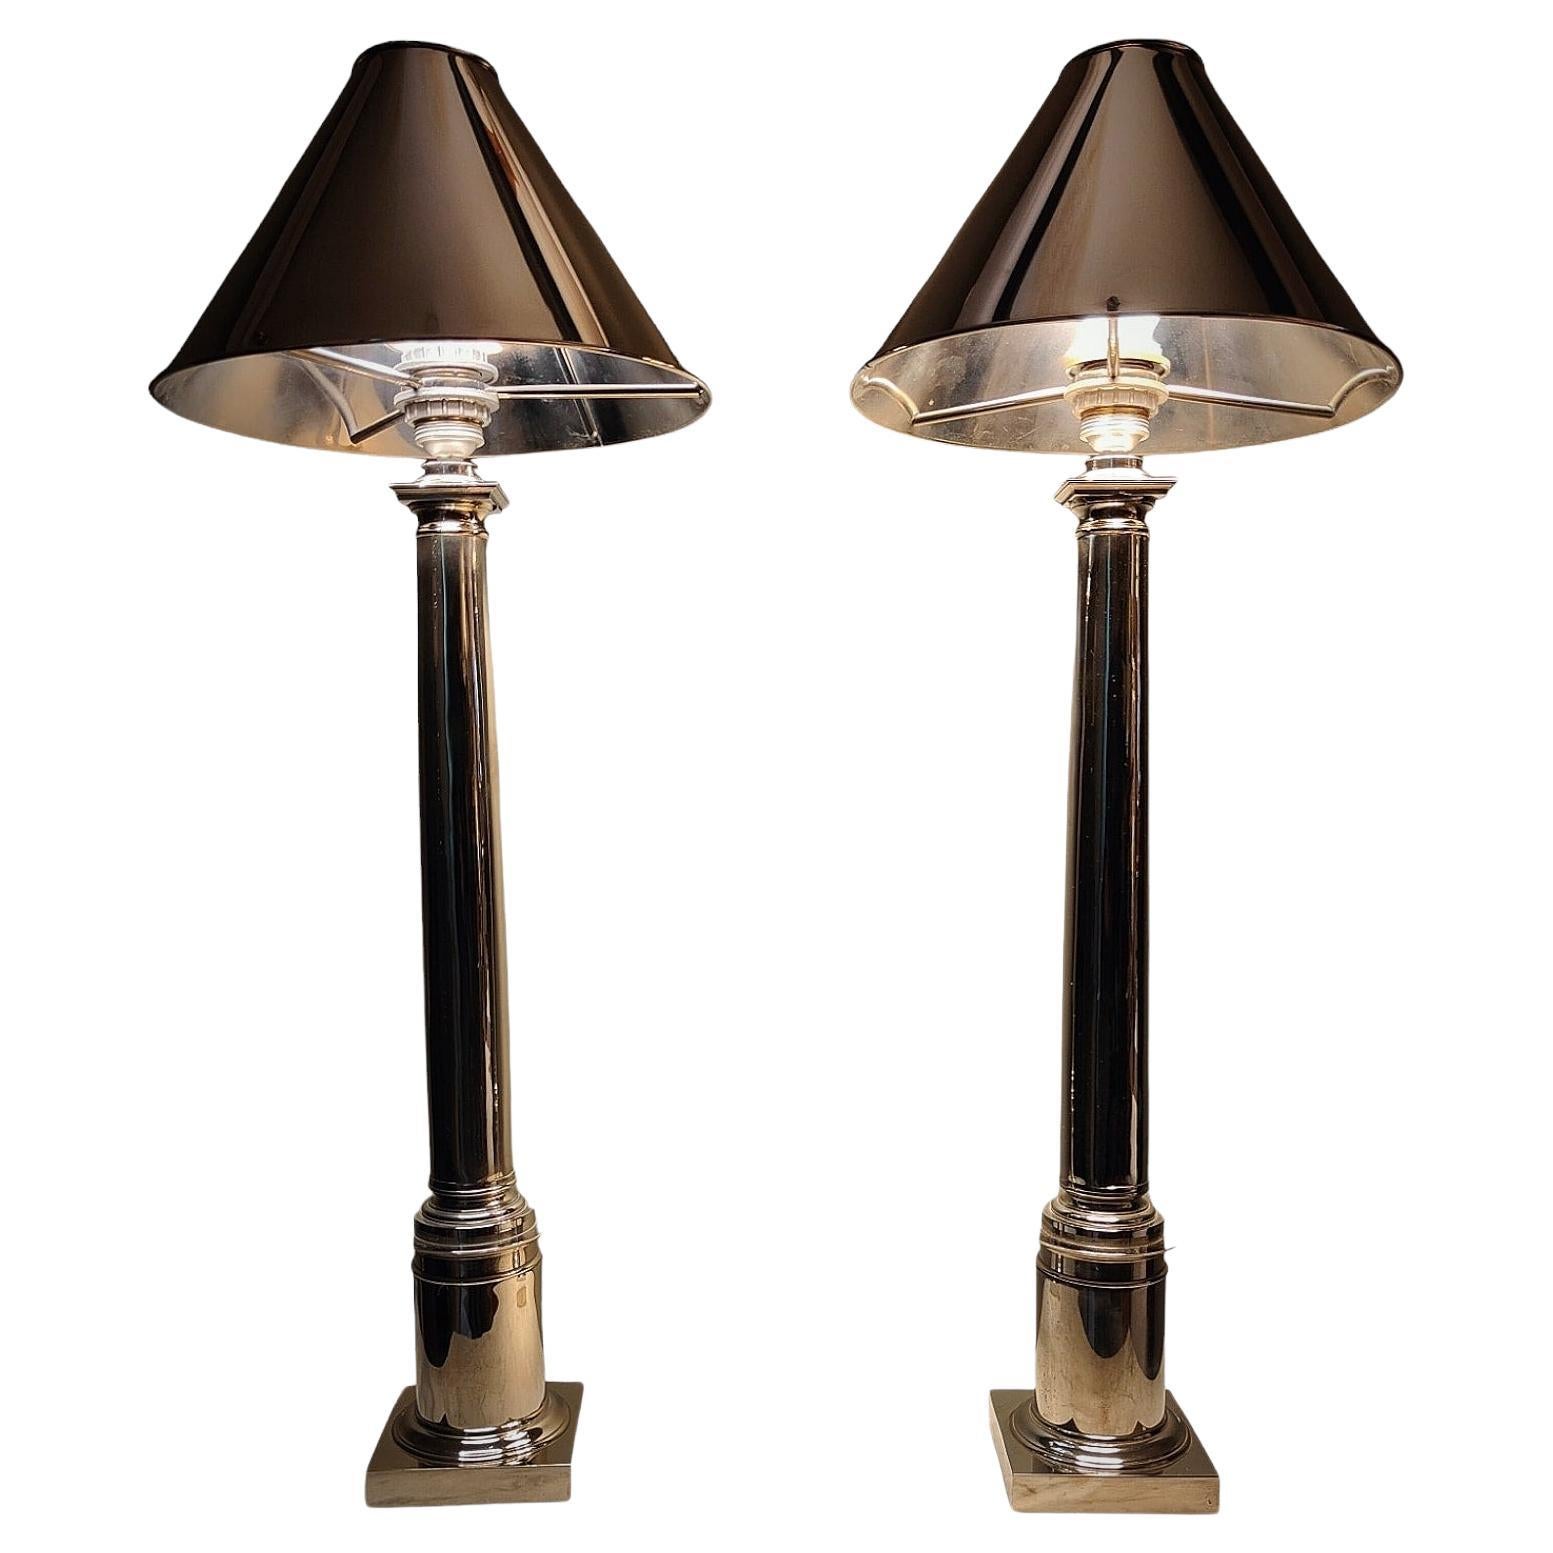 Elegant Architectural Design Bronze Lamps from the 1970s